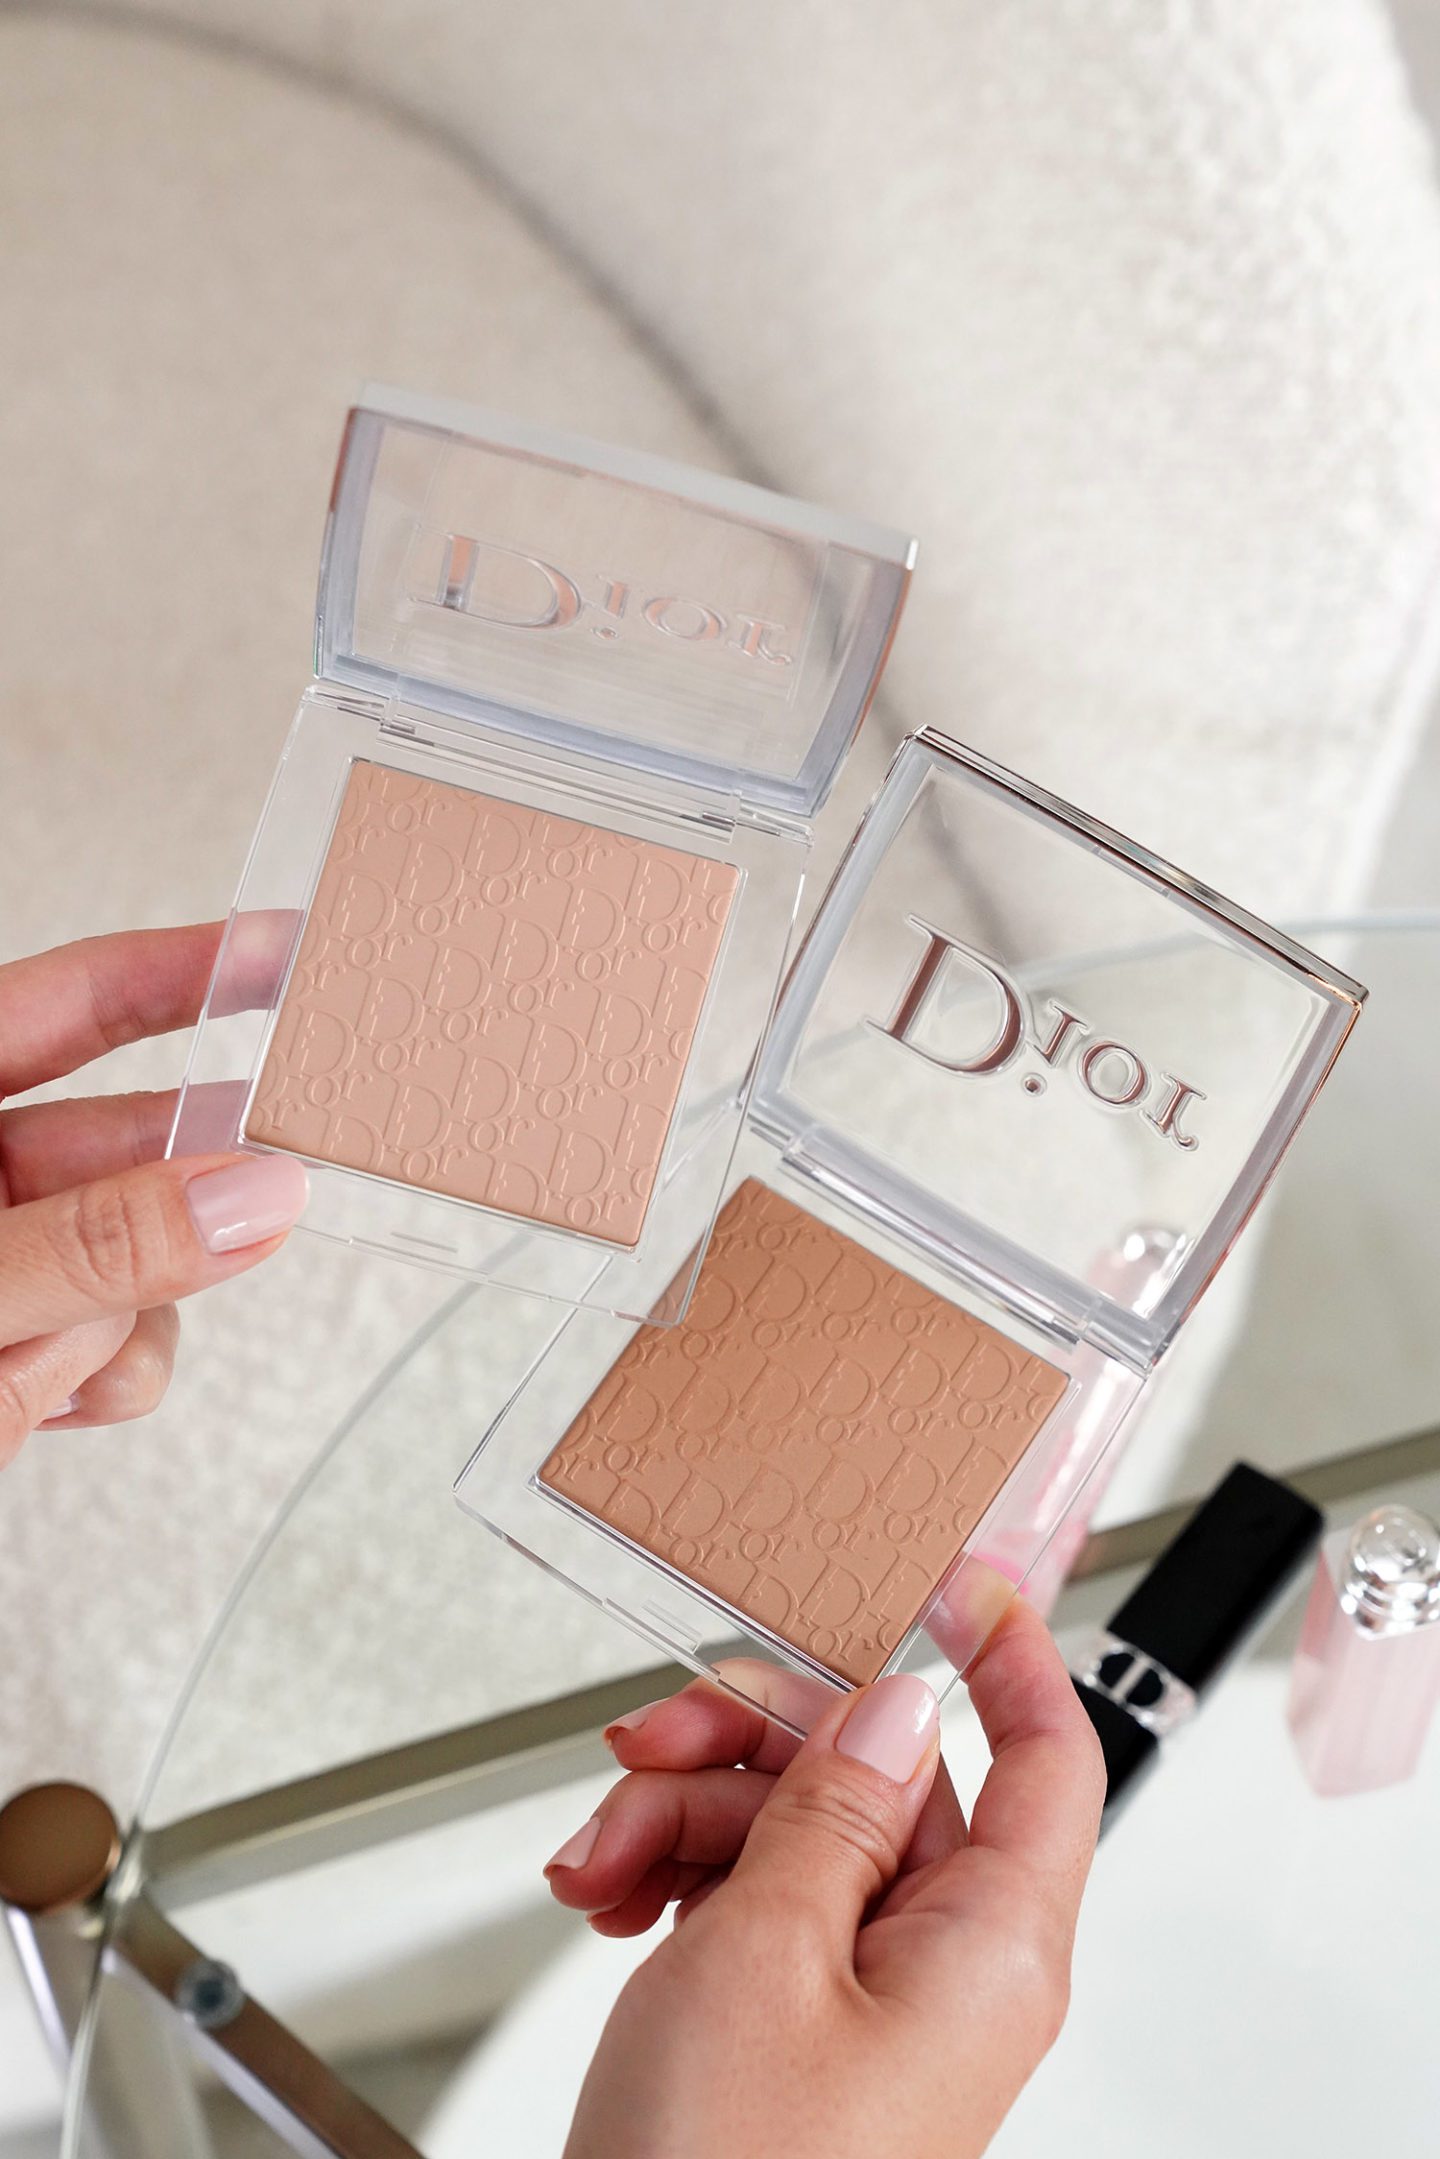 Dior Backstage Face and Body Powder-No-Powder in 2 Neutral and 3 Neutral